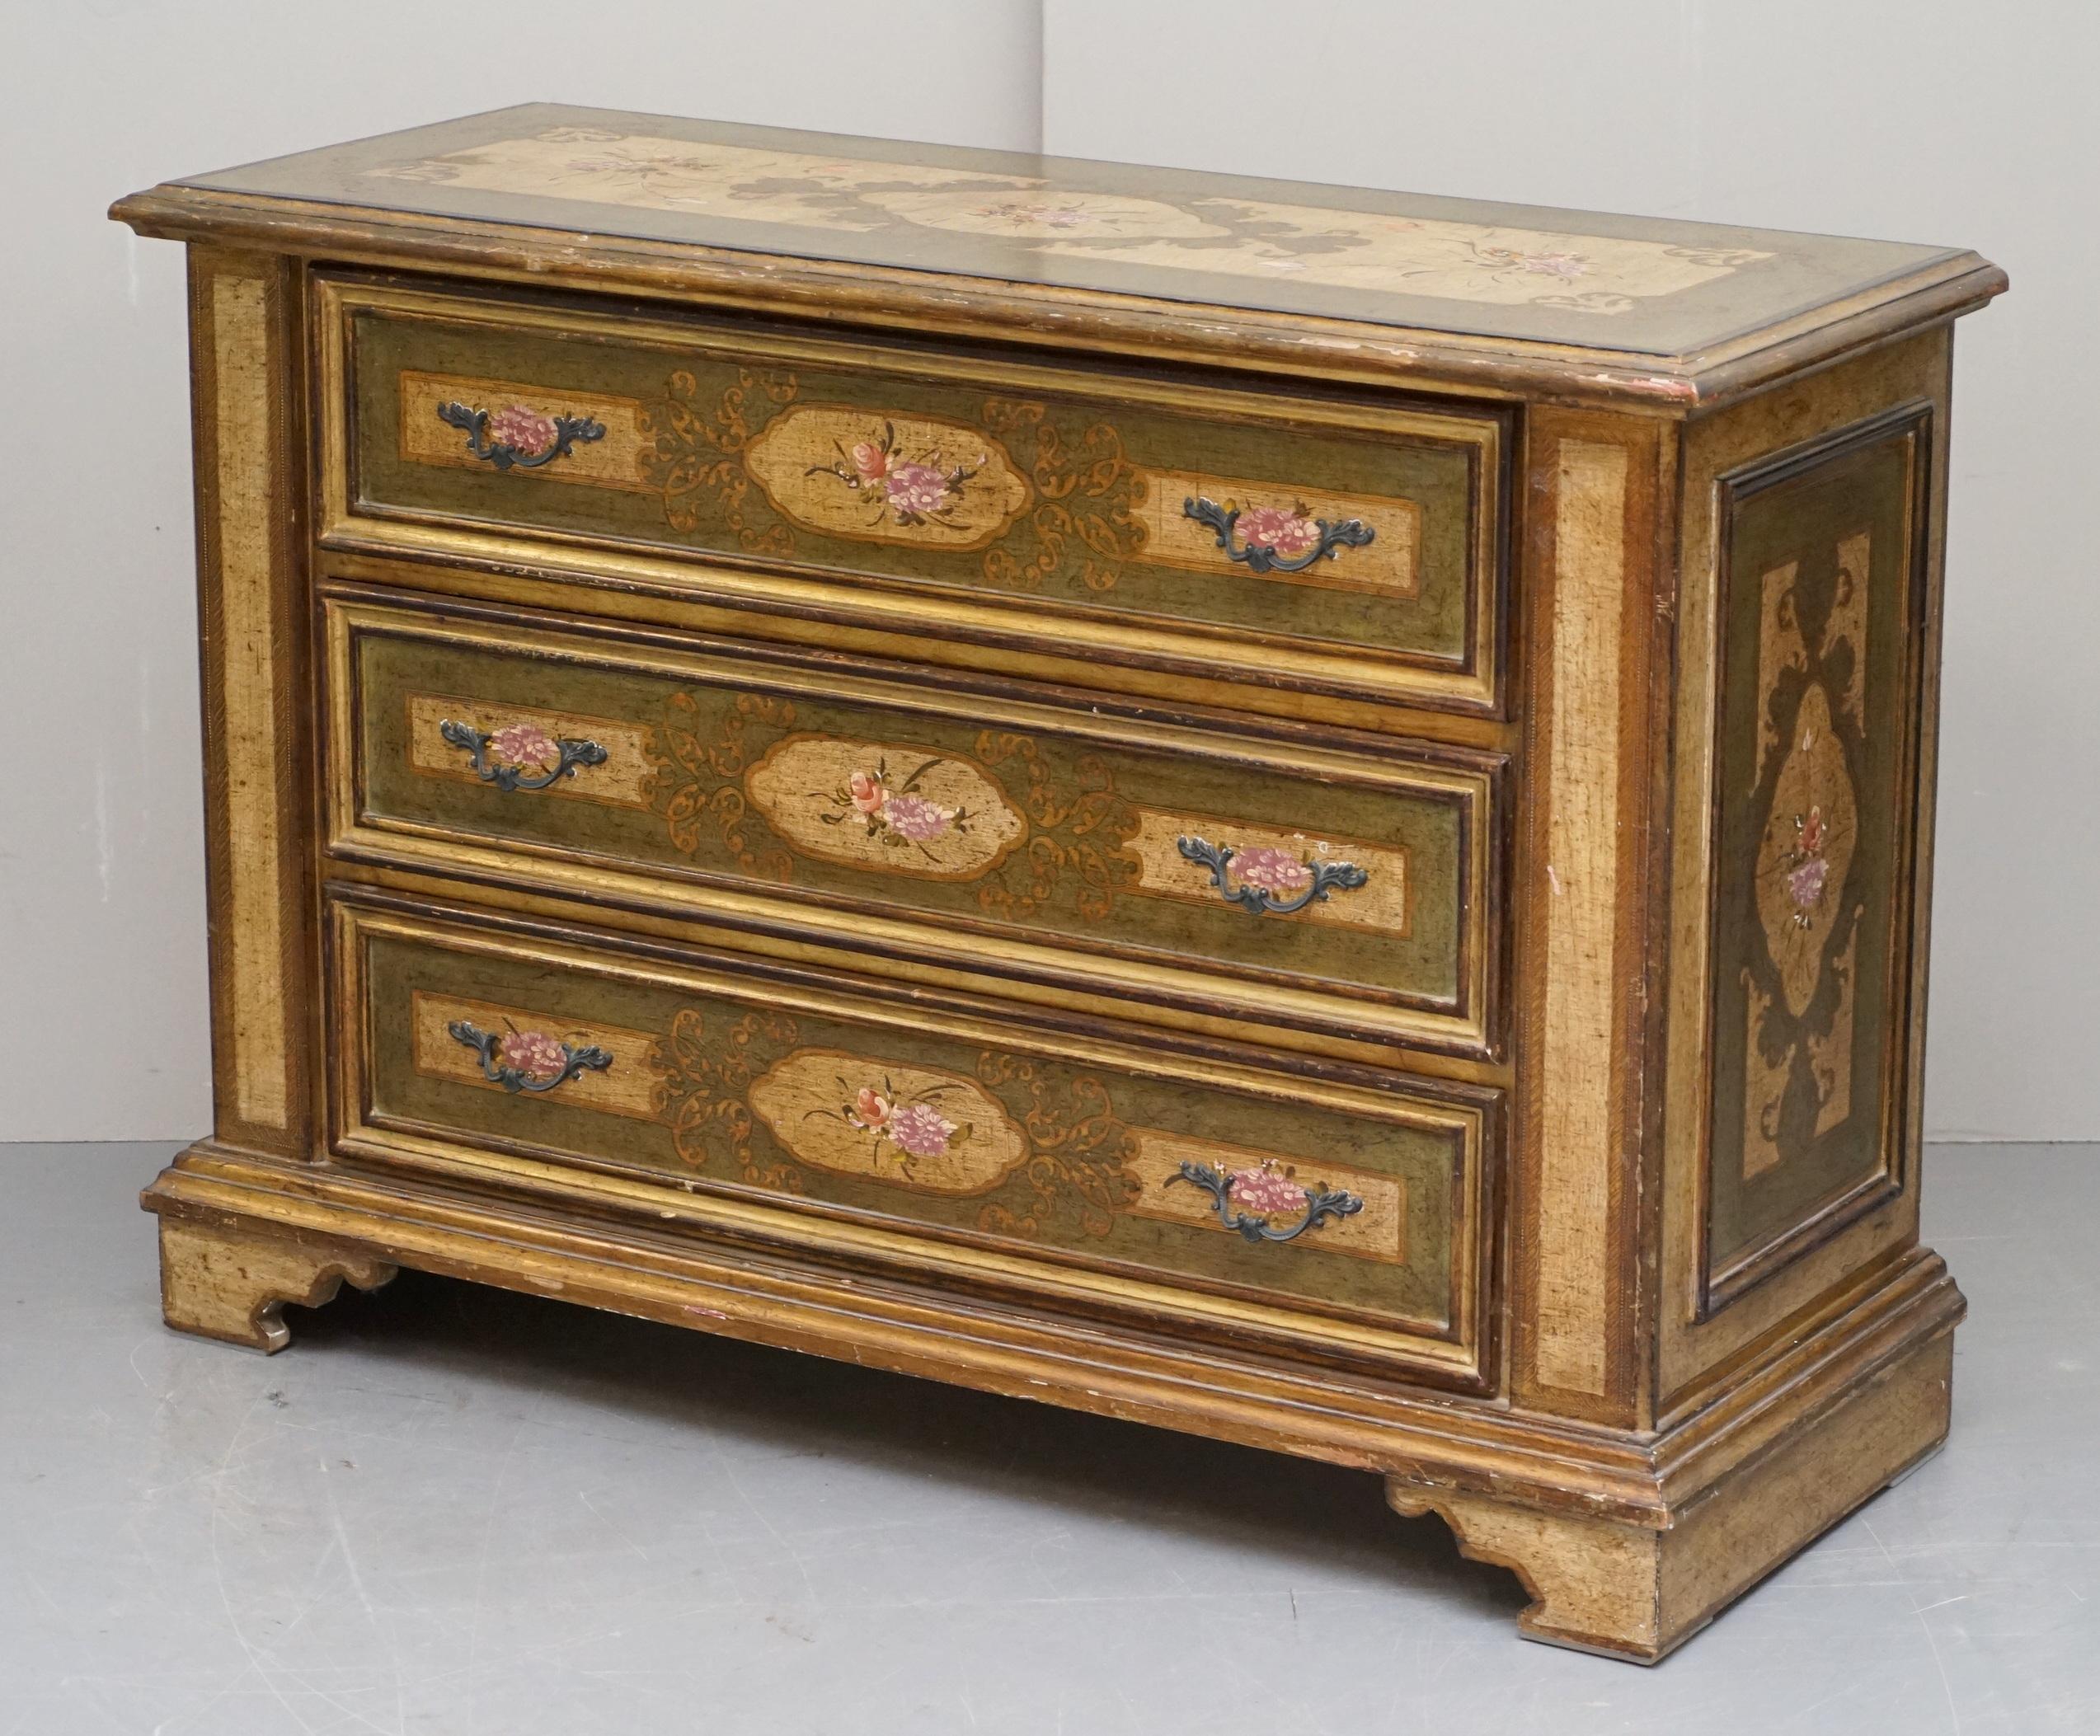 We are delighted to offer for sale this lovely 18th century style hand painted Venetian chest of drawers

A good looking and decorative chest of drawers, the frame is hardwood with oak drawers, the finish is hand painted with gold and silver leaf